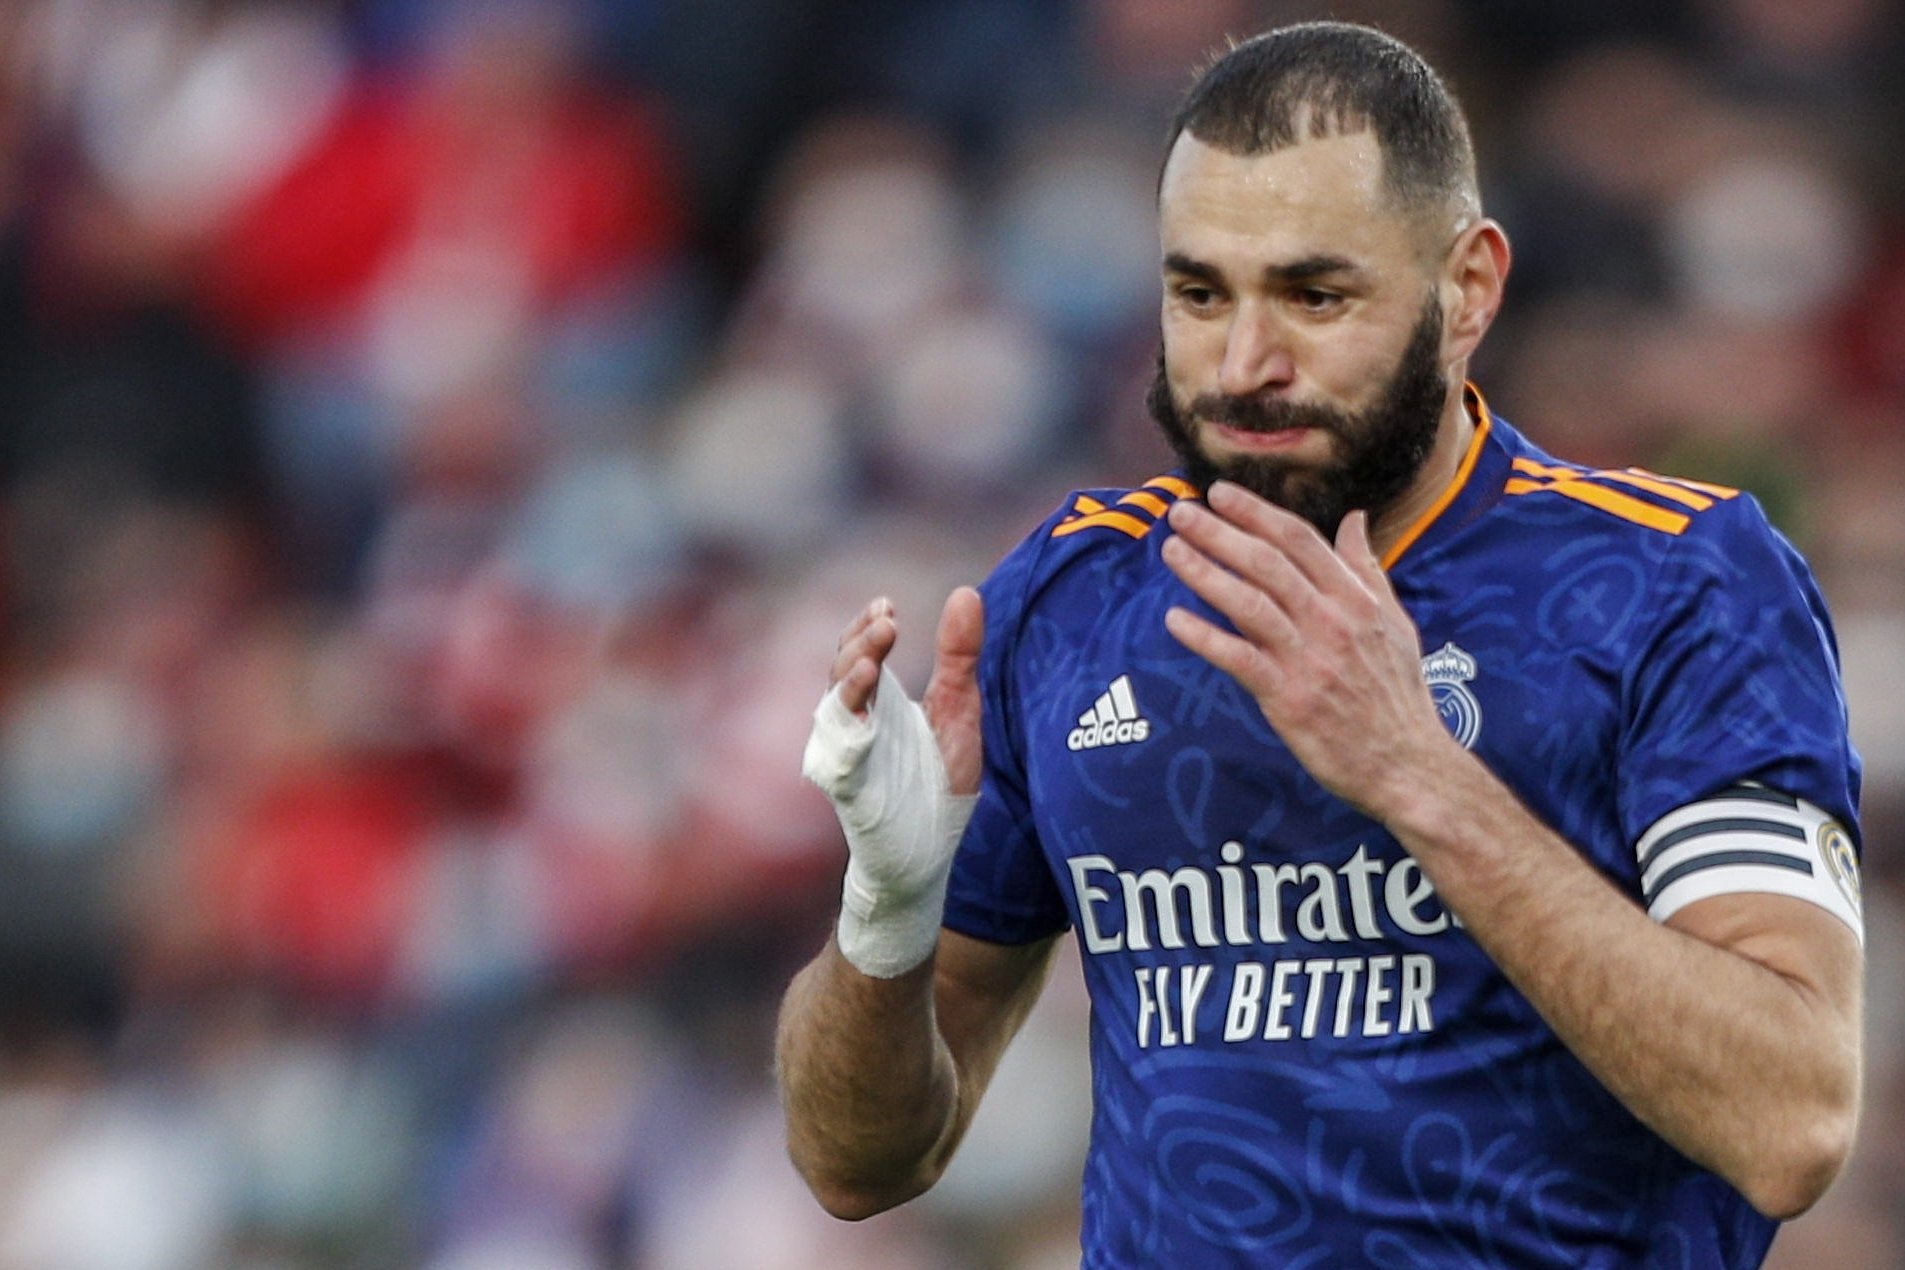 Real Madrid's Karim Benzema reacts after failing a chance to score during a Spanish La Liga soccer match between Granada and Real Madrid at Los Carmenes stadium in Granada, Spain, Nov. 21, 2021. (AP Photo)